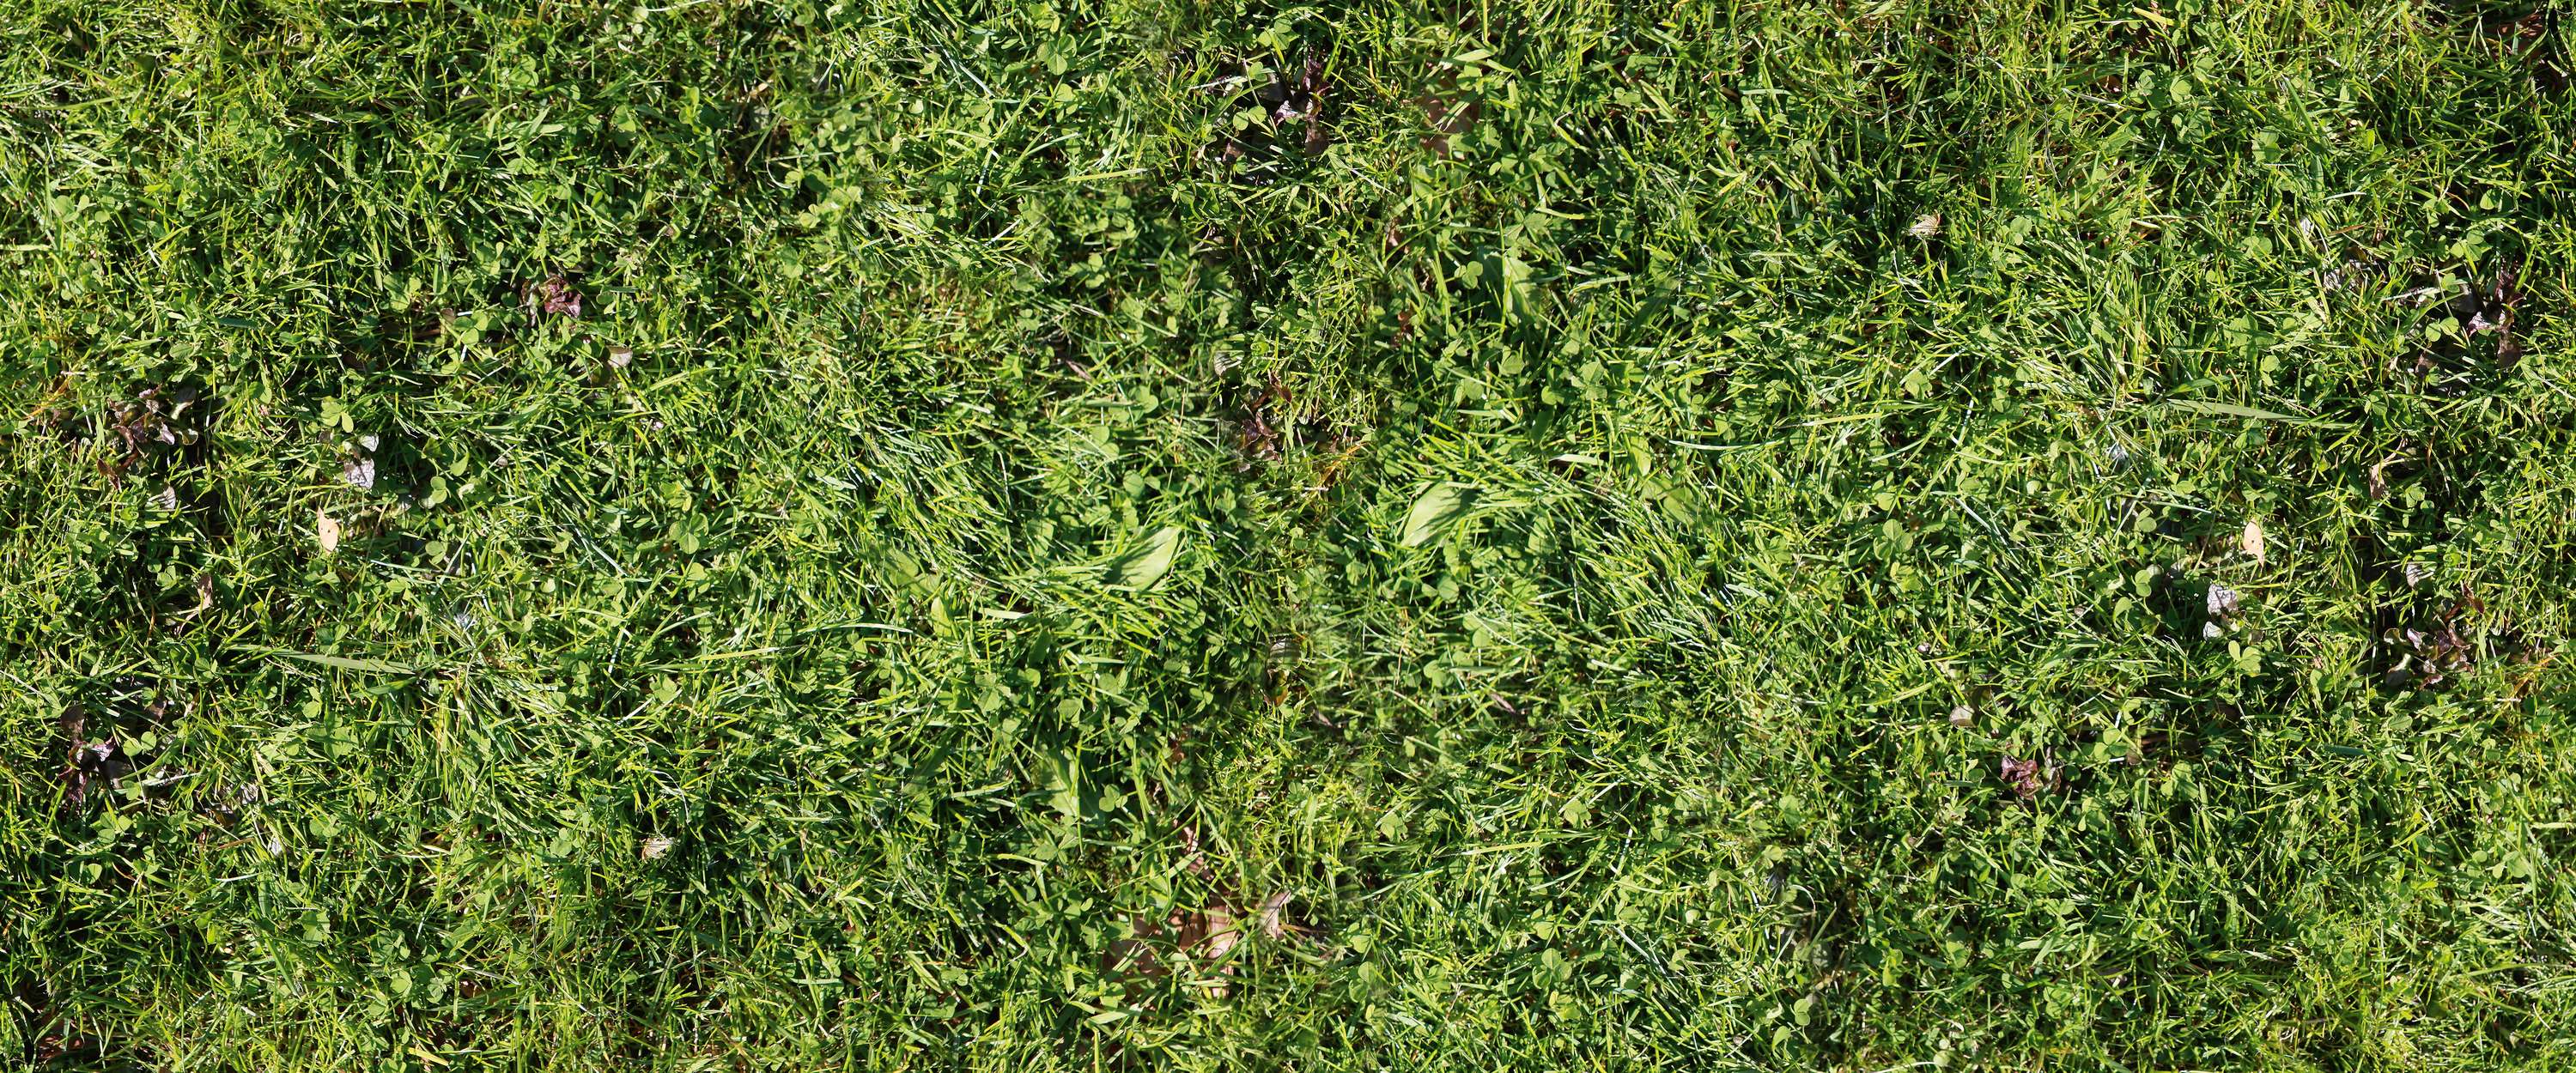             Photo wallpaper lawn detail meadow with clover
        